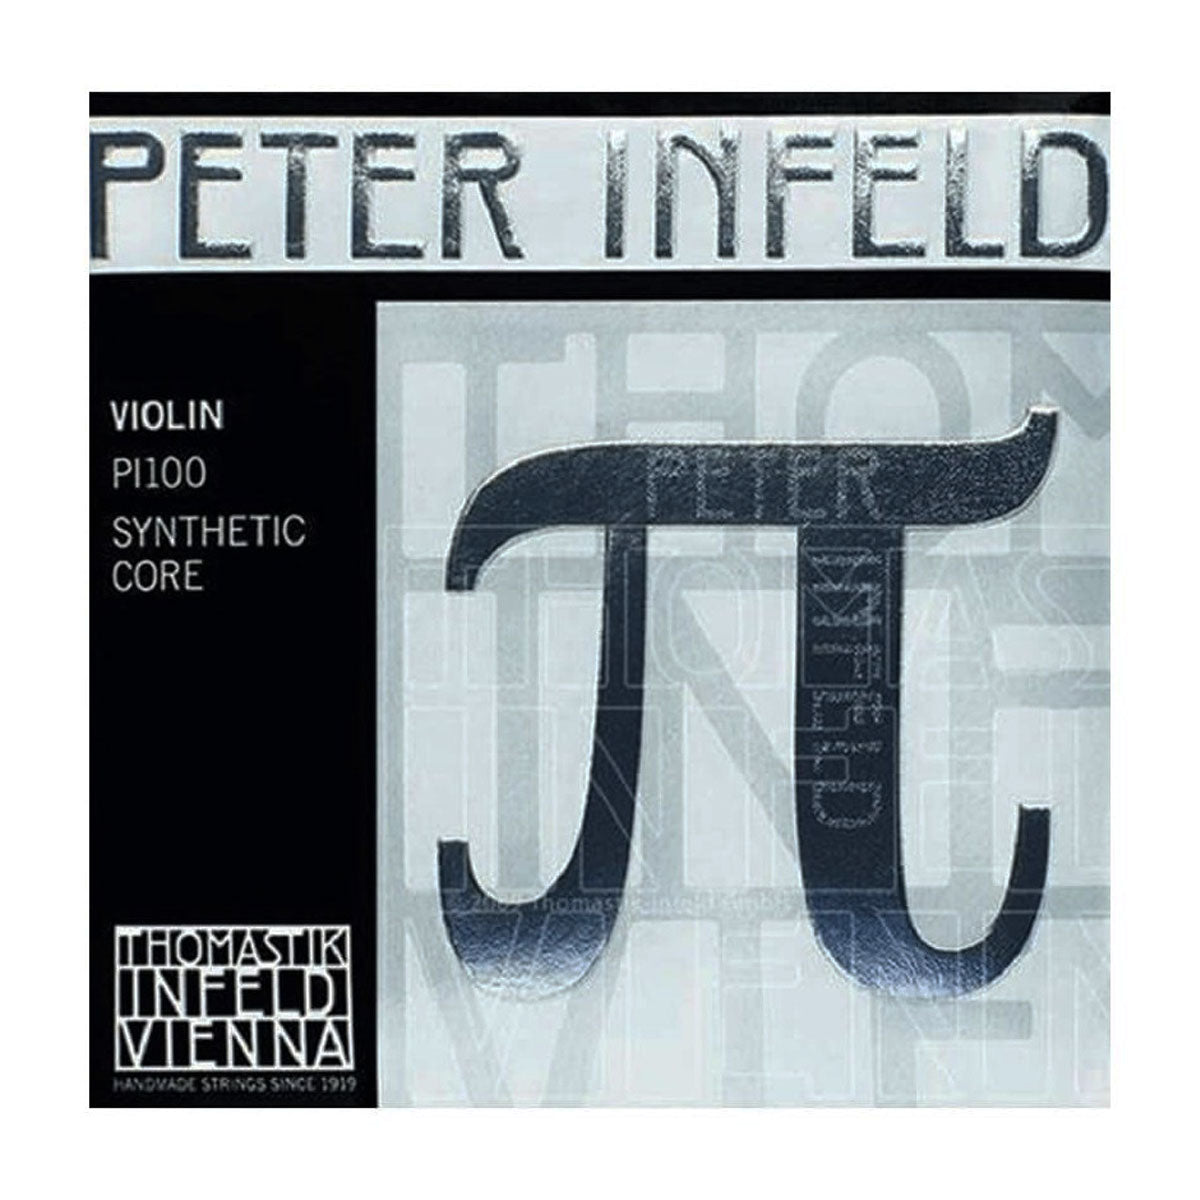 Peter Infeld Pi Strings, Thomastik Infeld, Austria, full size, 4/4, 3/4, 1/2, 1/4, 1/8, 1/16, hand-picked and inspected by Violins and such, with TEO musical Instruments, London Ontario Canada